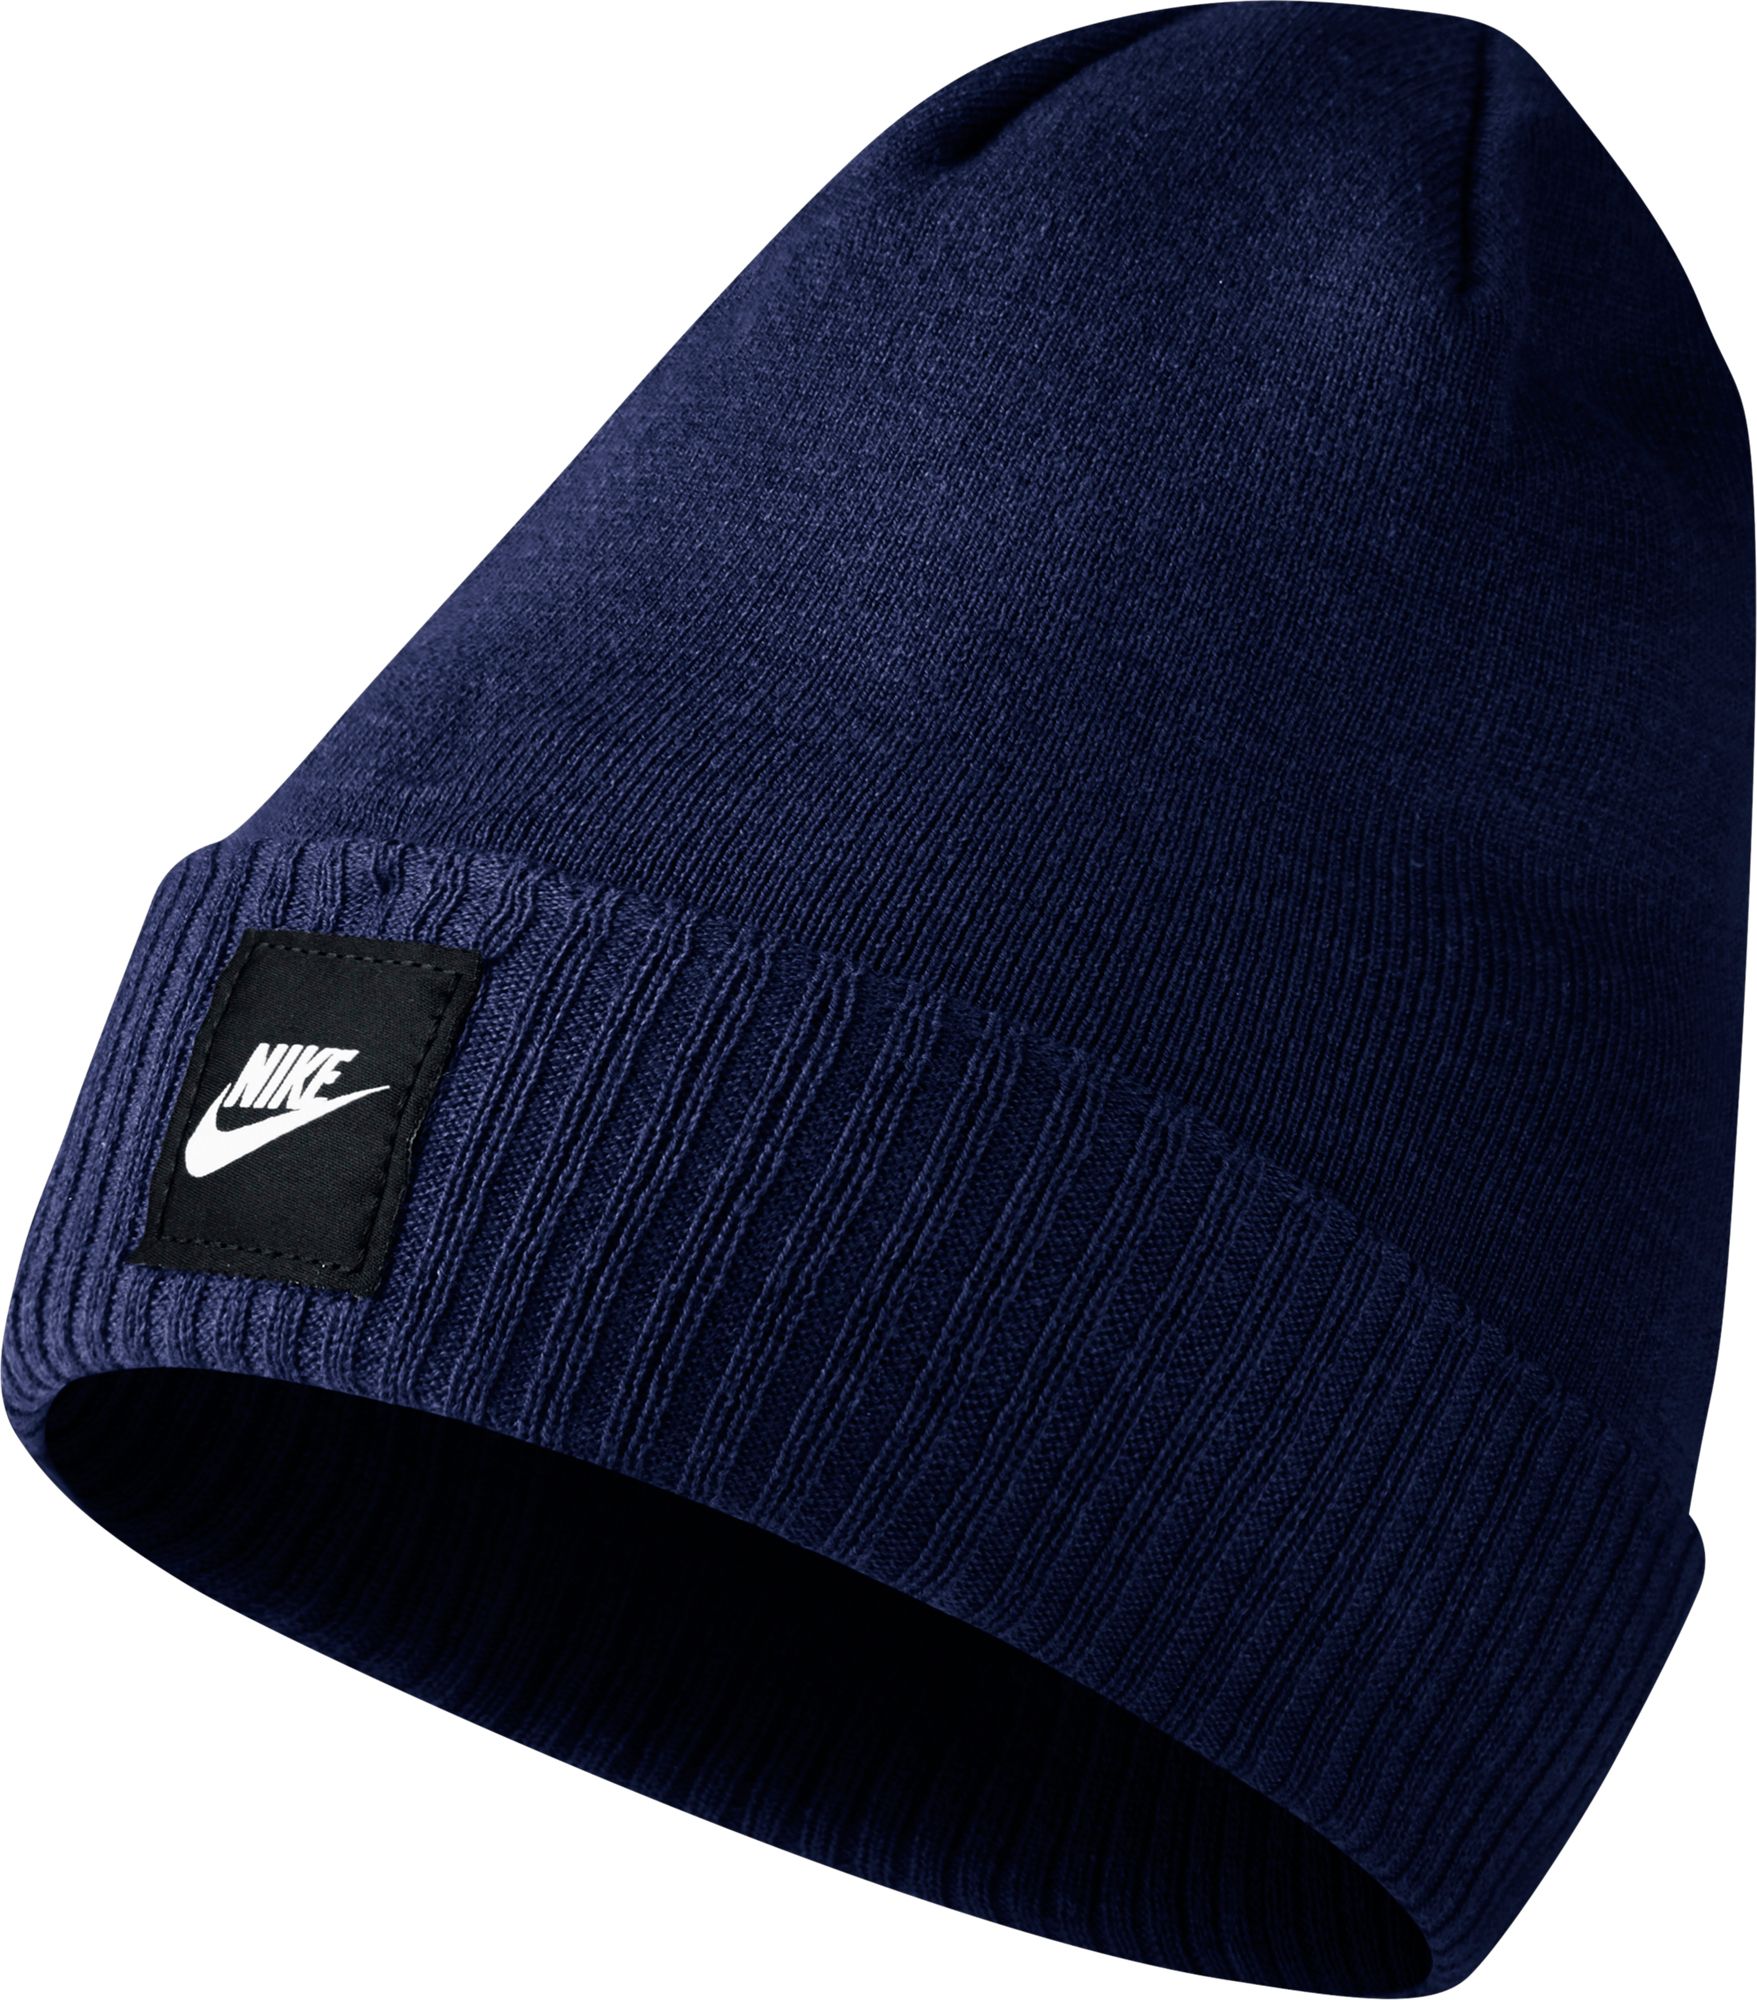 nike hats for winter